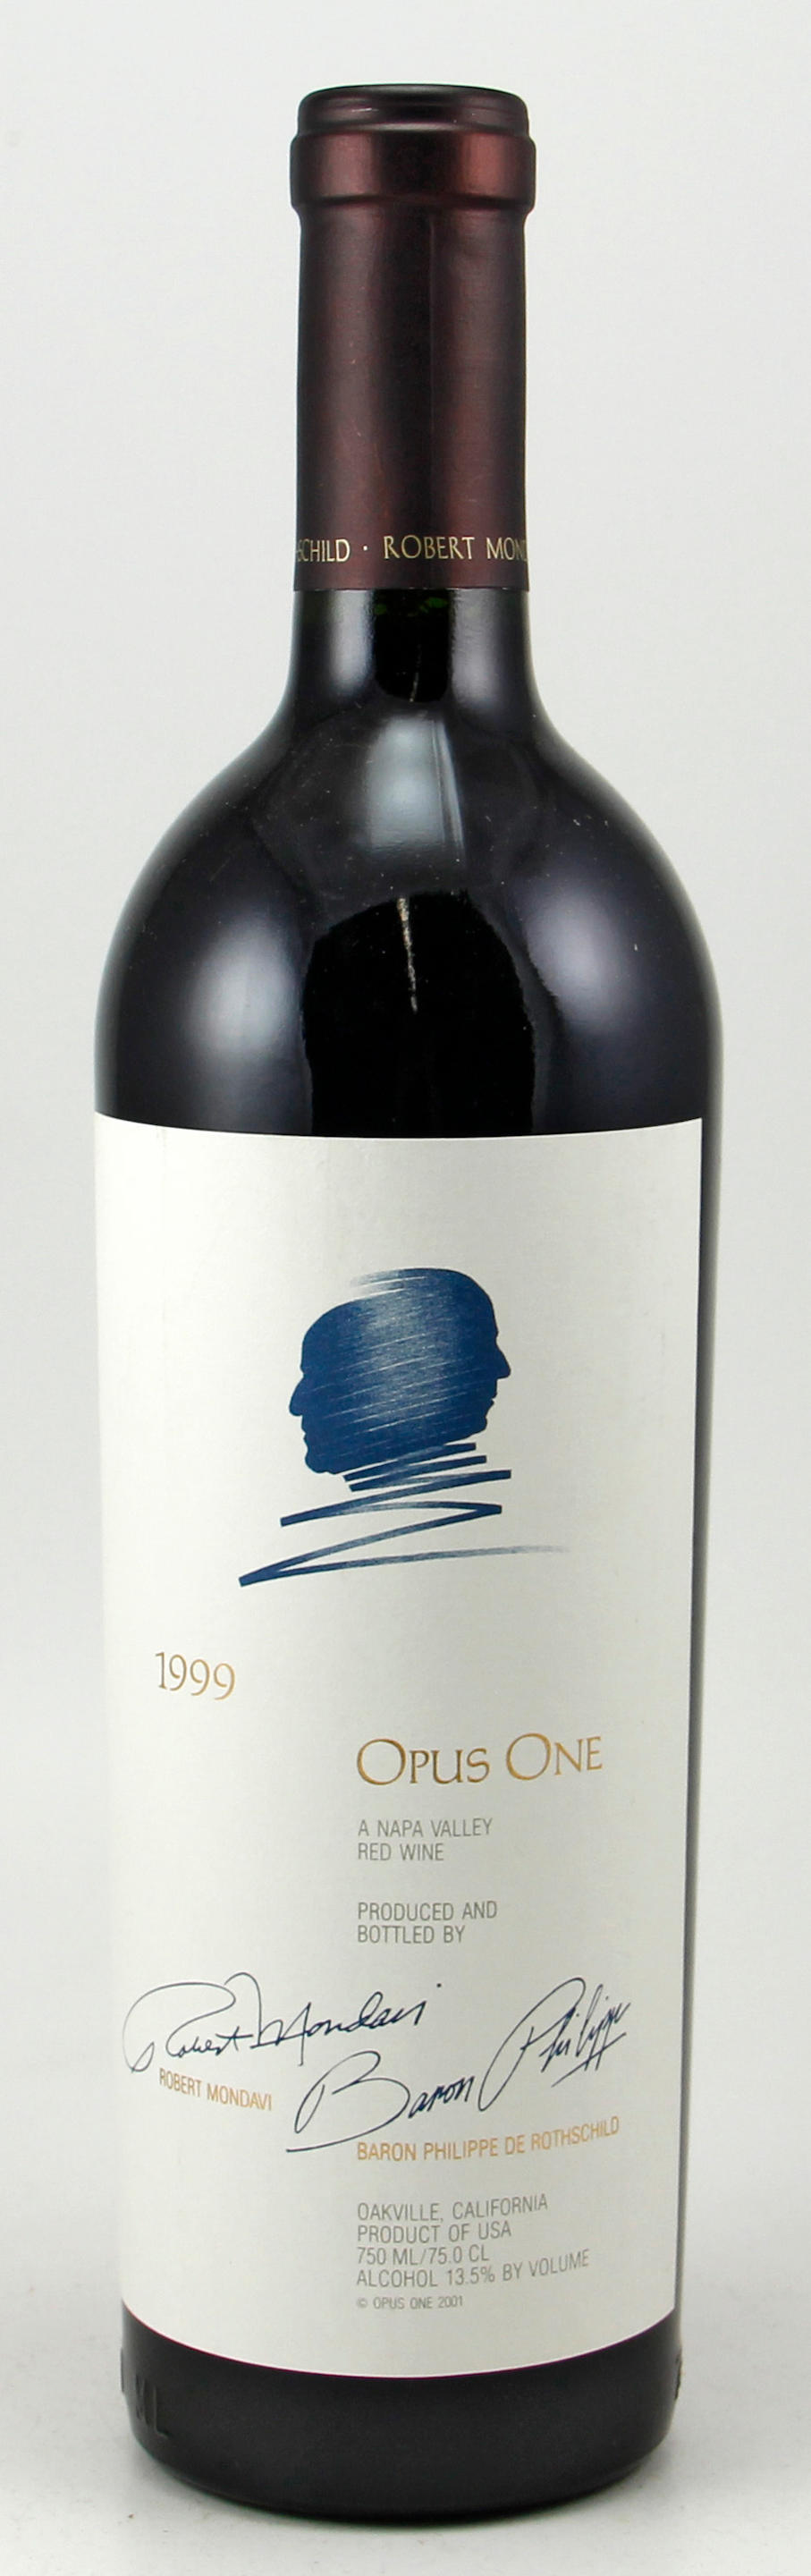 1999 opus one value